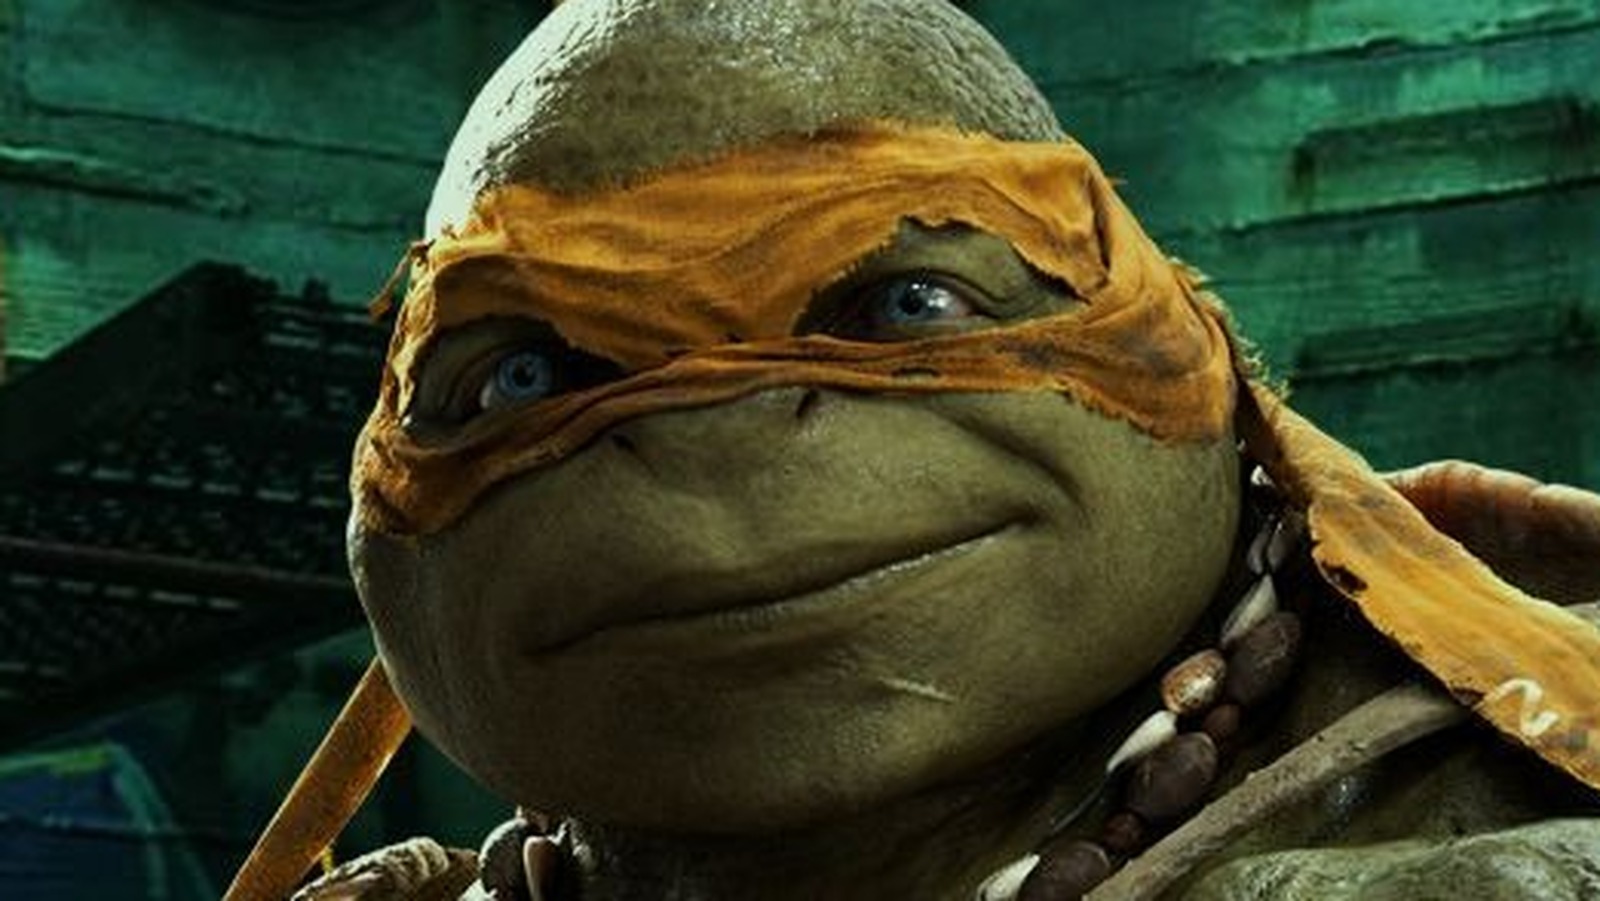 Teenage Mutant Ninja Turtles A Turtley Awesome Guide To Every Version  Ever  AFA Animation For Adults  Animation News Reviews Articles  Podcasts and More